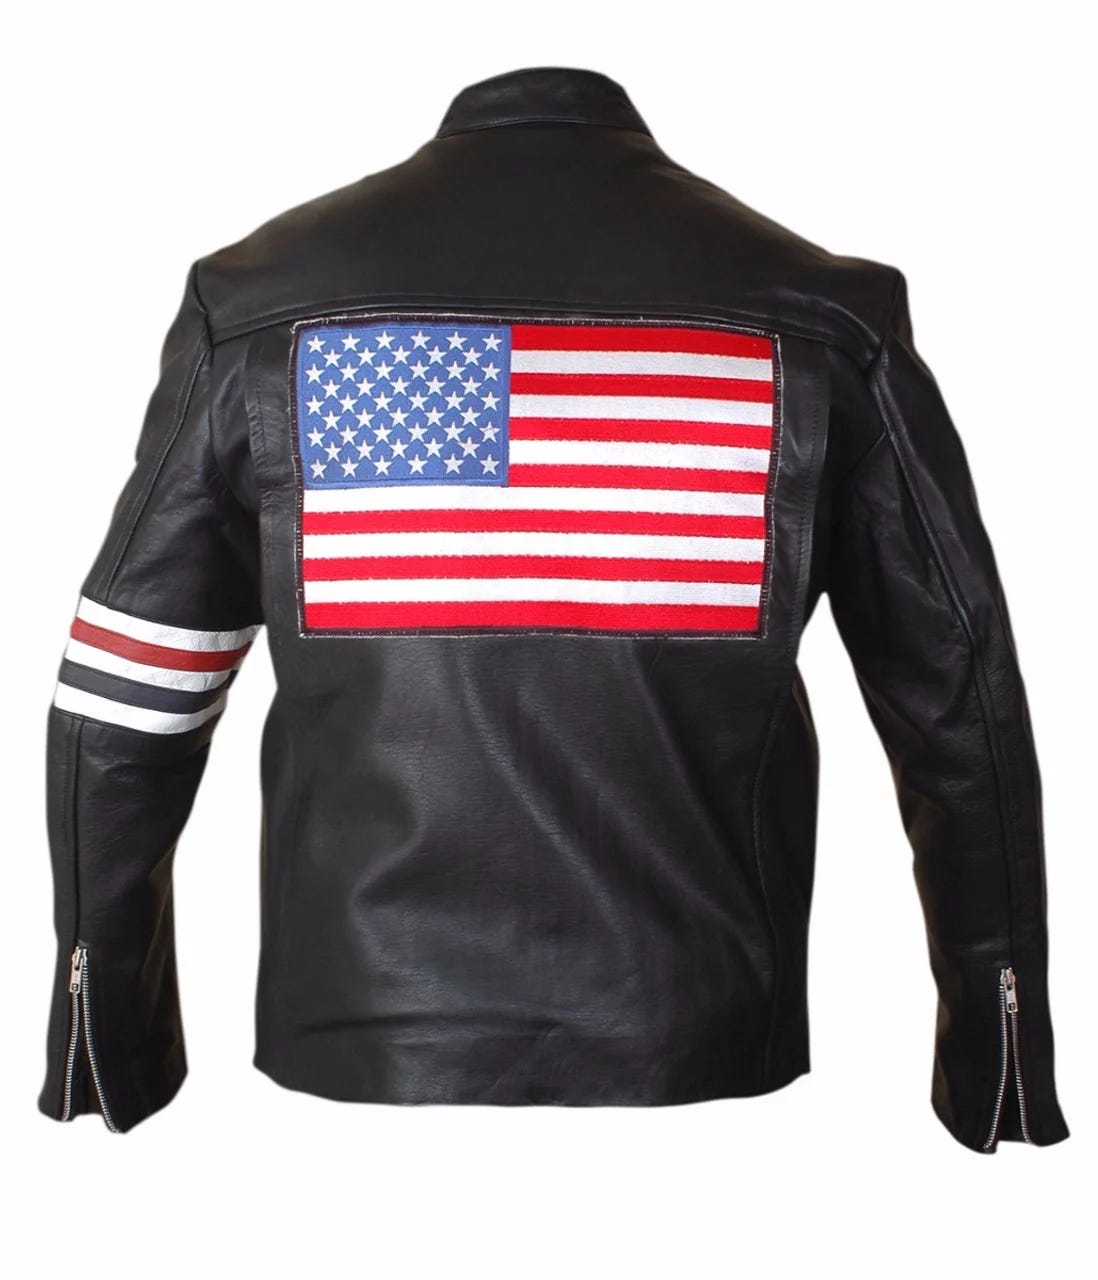 American Flag Jacket: Show Your Patriotism in Style - Mens Leather ...